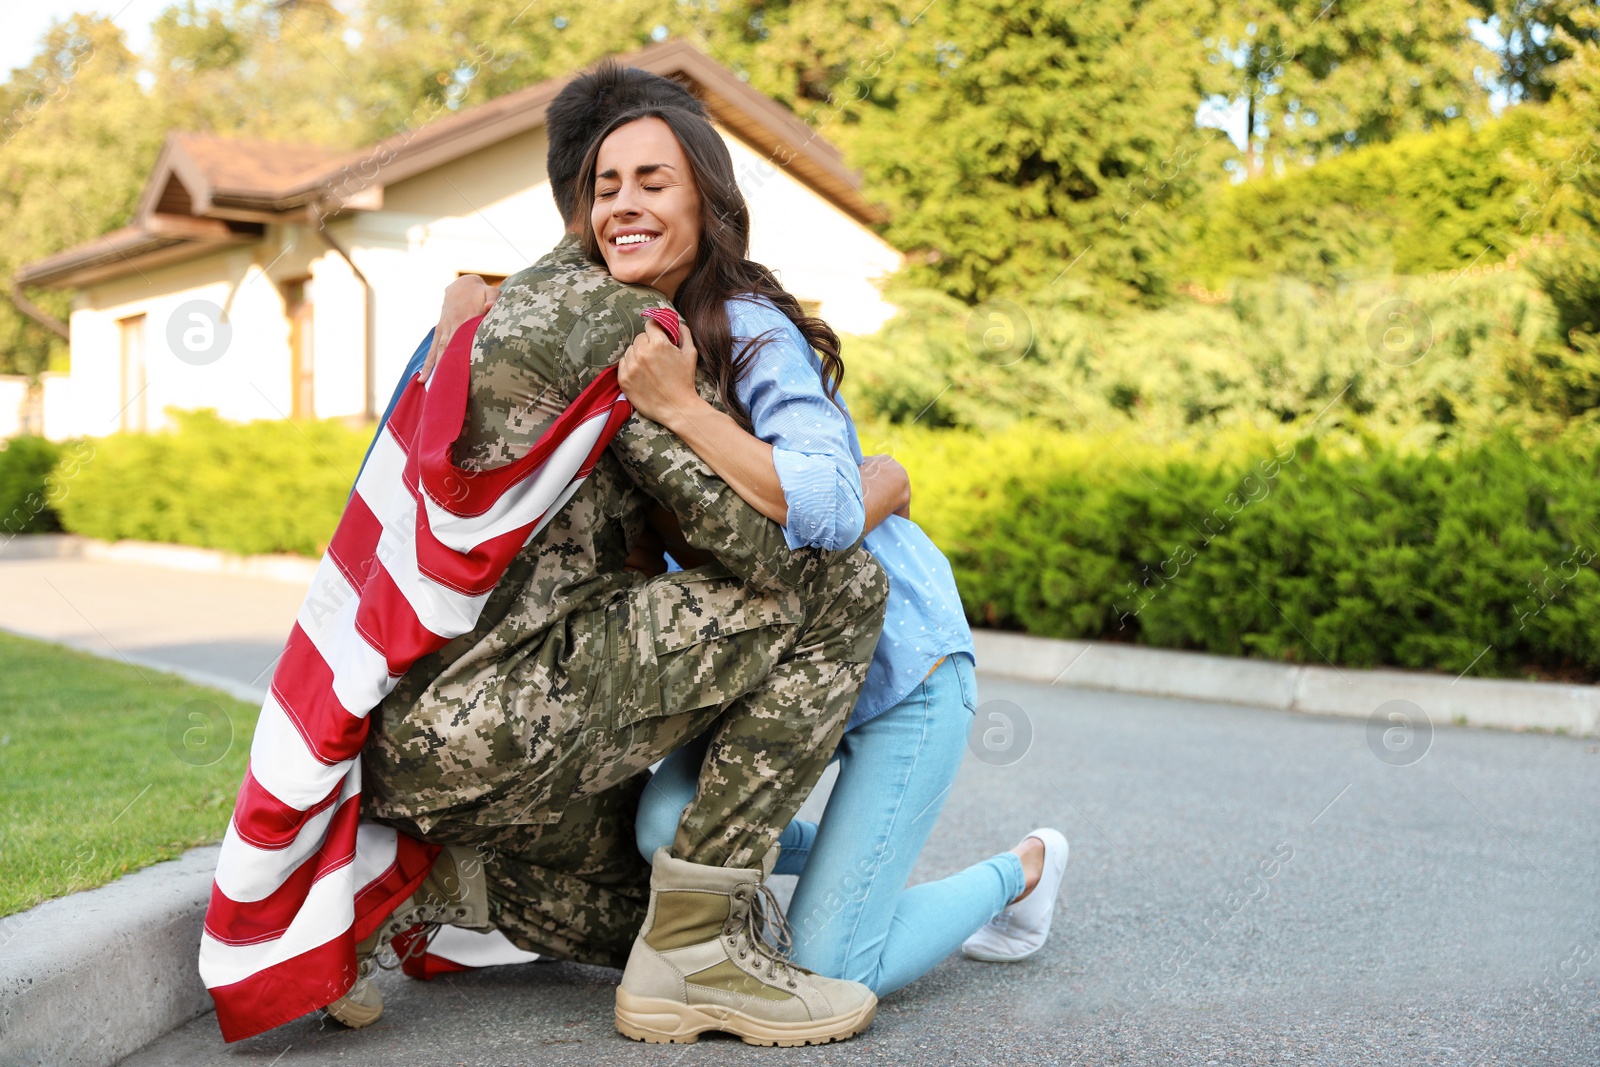 Photo of Man in military uniform with American flag hugging his wife outdoors